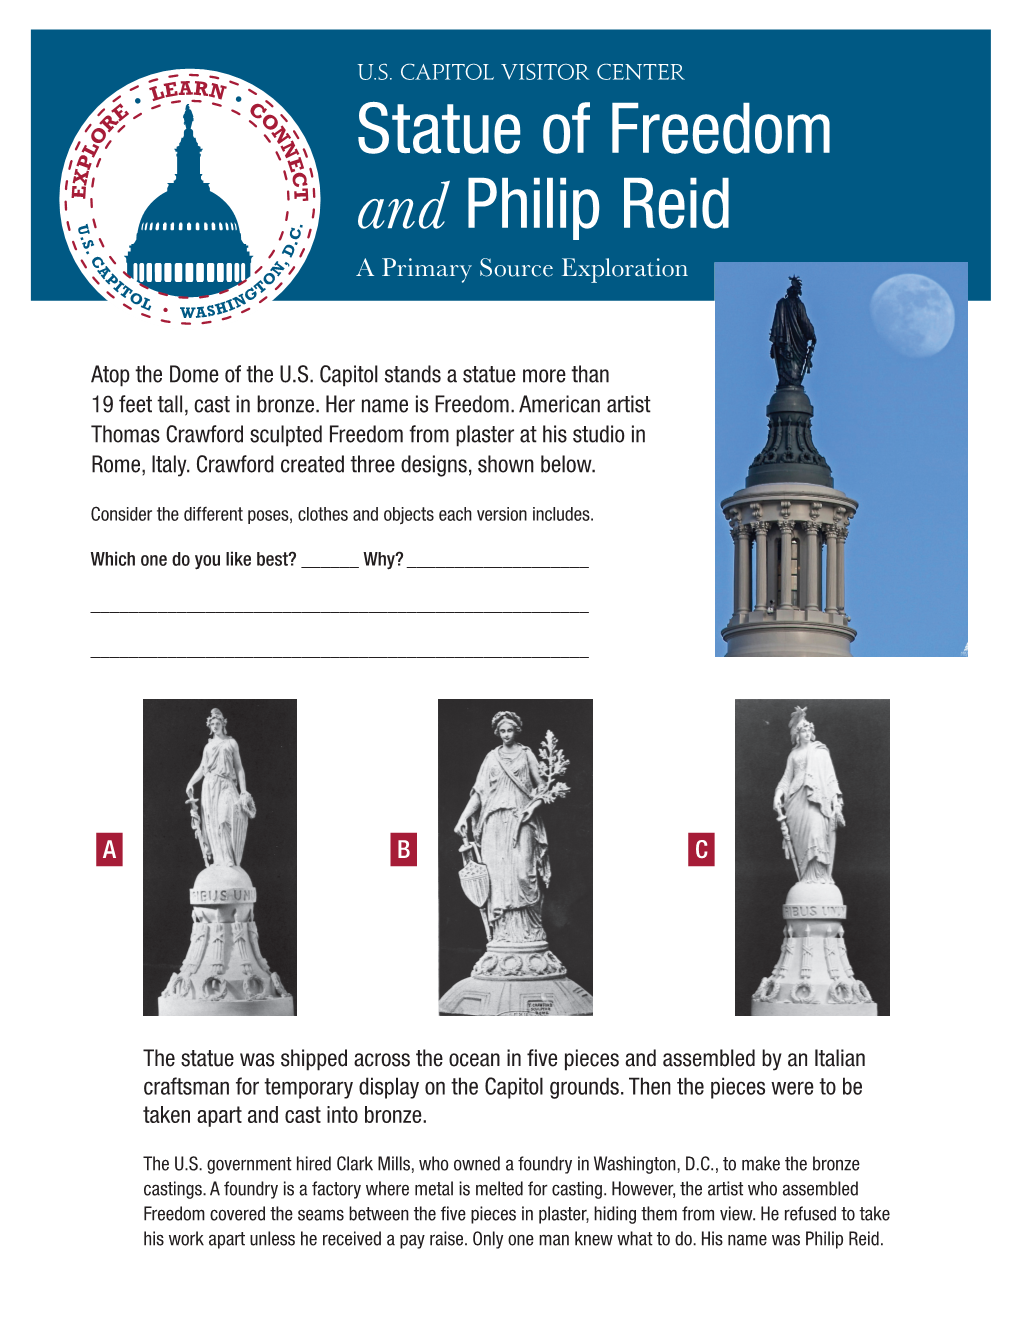 STATUE of FREEDOM and PHILIP REID This Is a Pay Voucher Received by Philip Reid